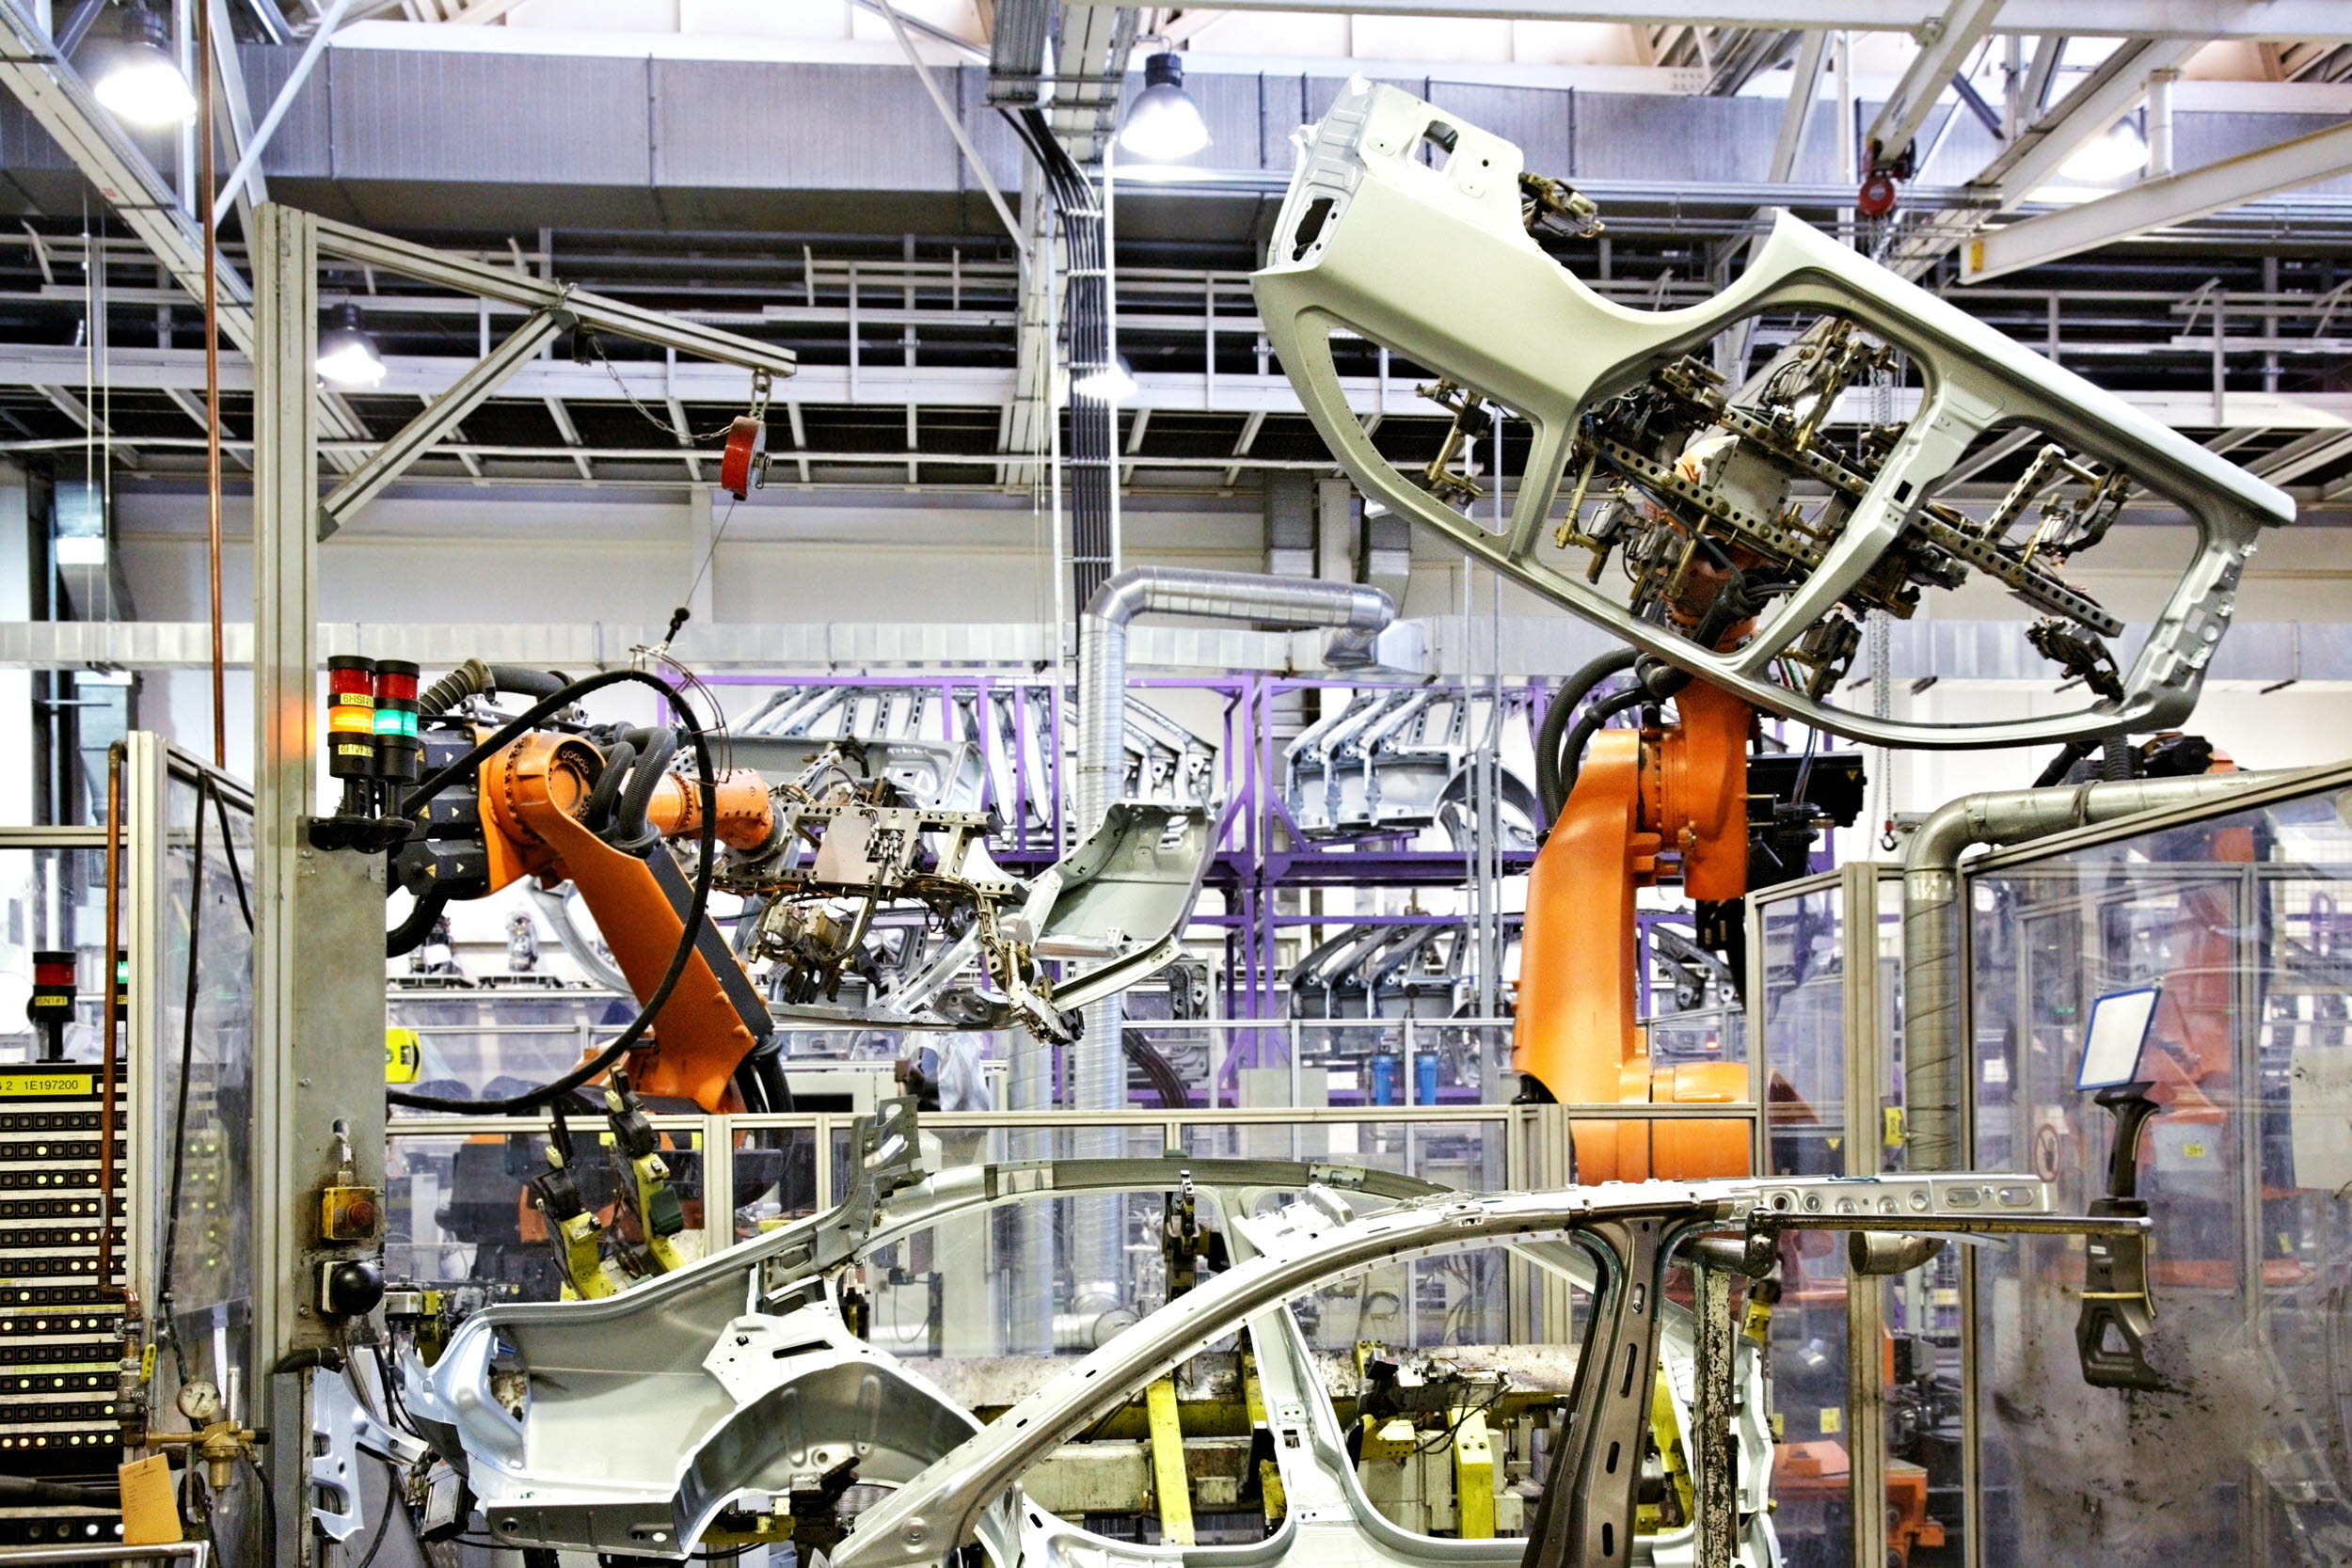 Automated assembly line - Standard operating procedure